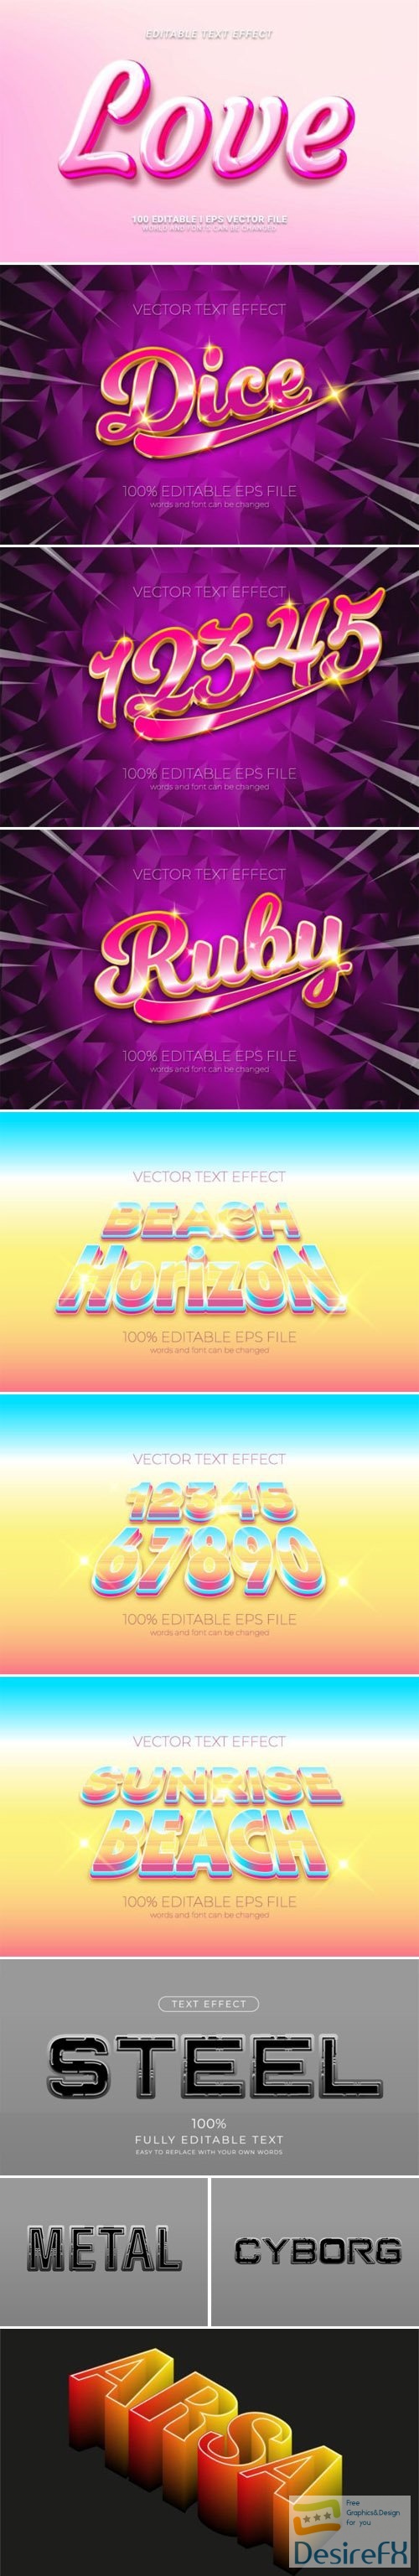 3D Editable Text Effects for Illustrator